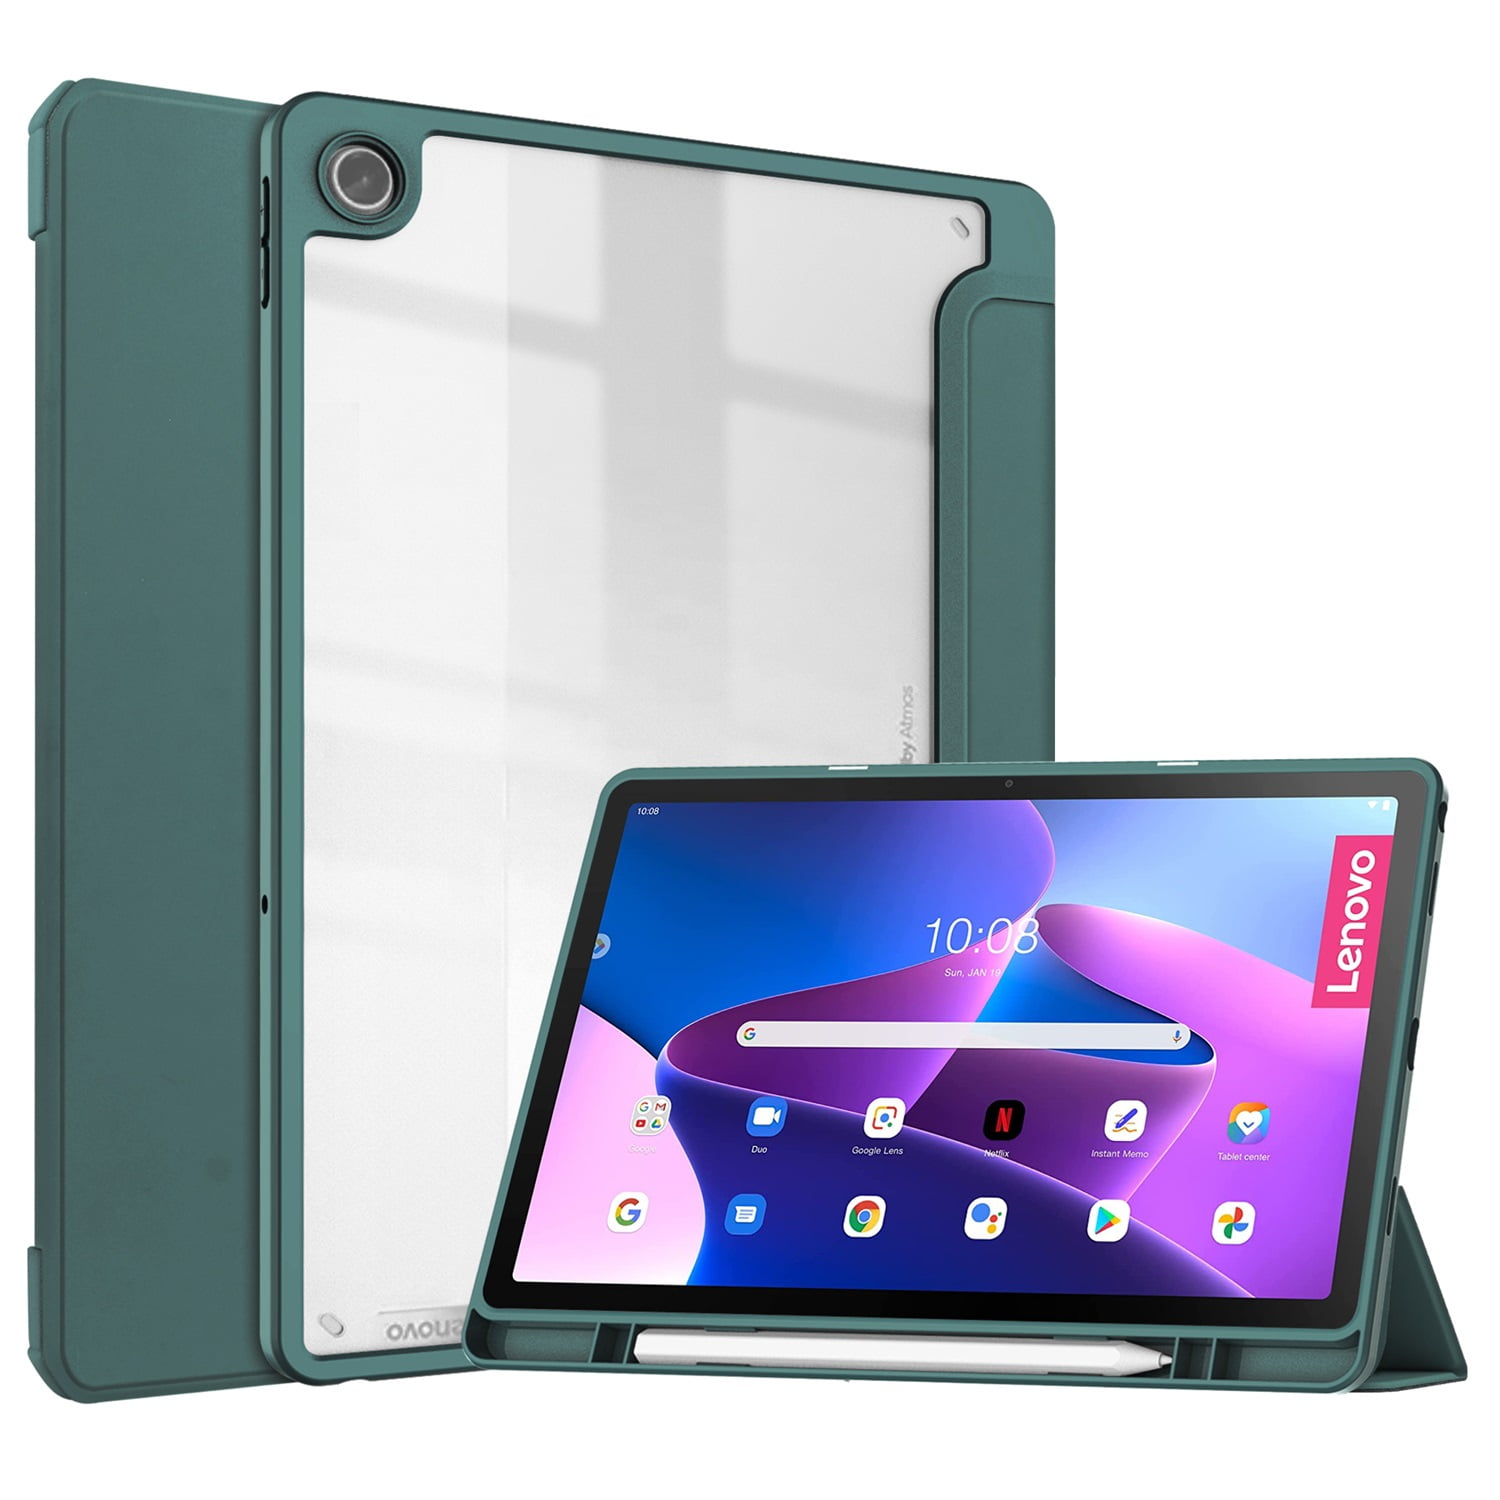 Case for Lenovo Tab M10 Plus 10.3 Inch/K10 with Screen Protector,HXCASEAC  360°Rotating Hand Strap/Stand, Pen Holder,Shoulder Strap for Tablet 10.3